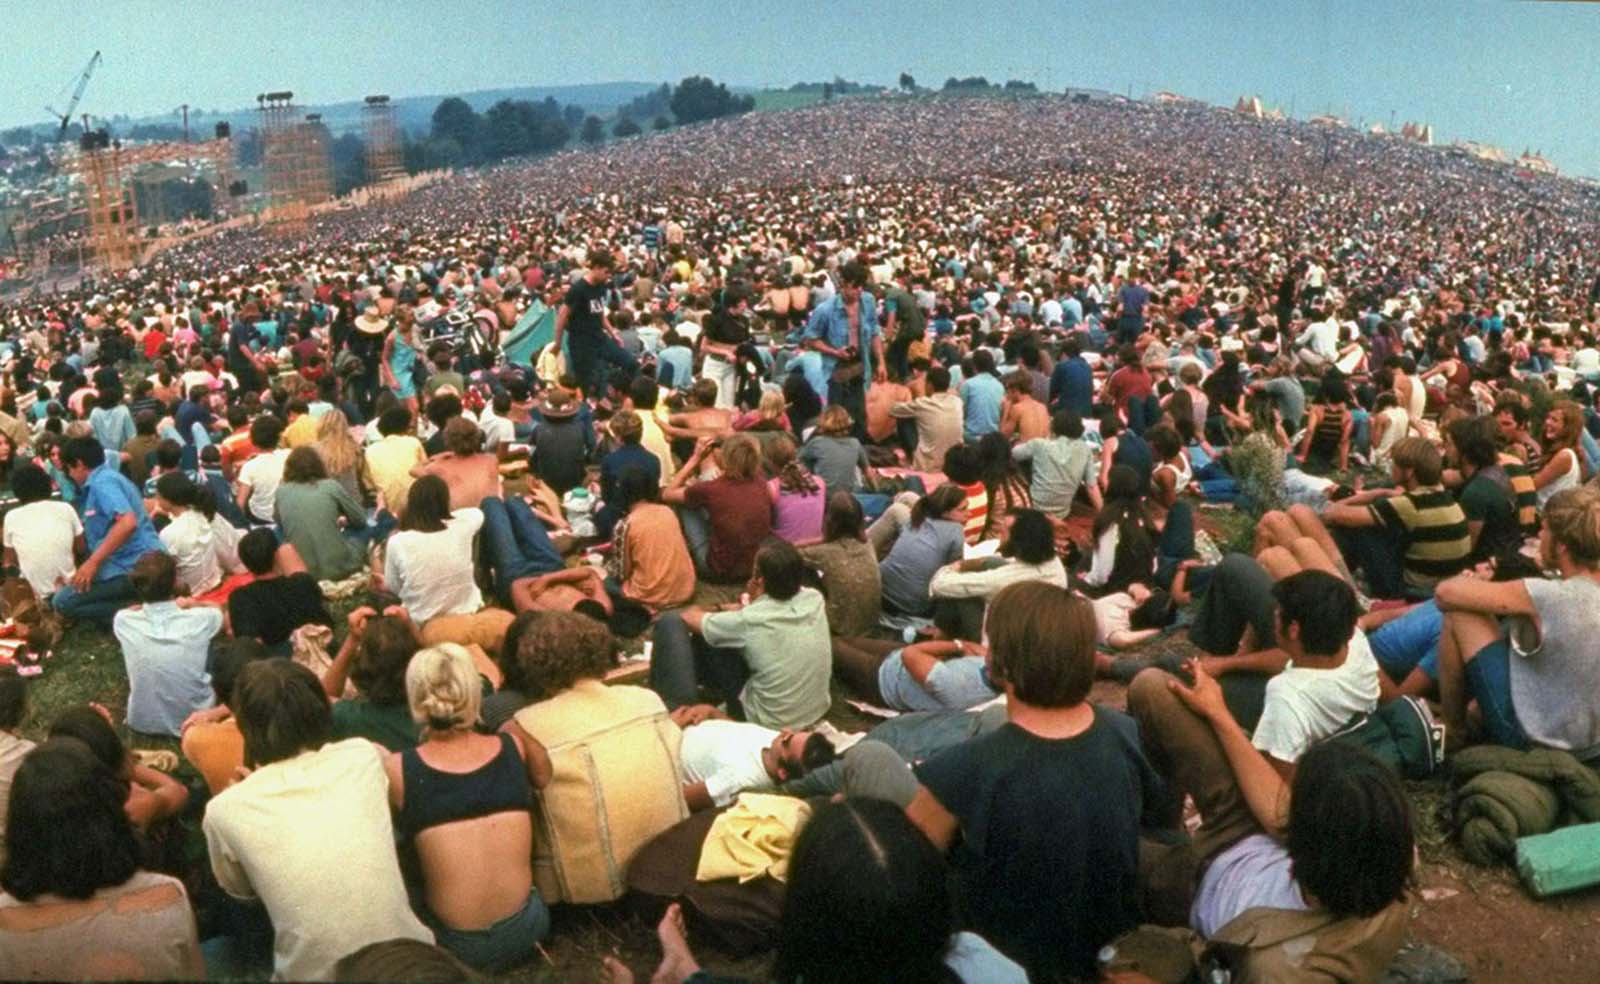 A wide-angle view of the huge crowd facing the distant stage during the Woodstock Music & Art Fair in August 1969.